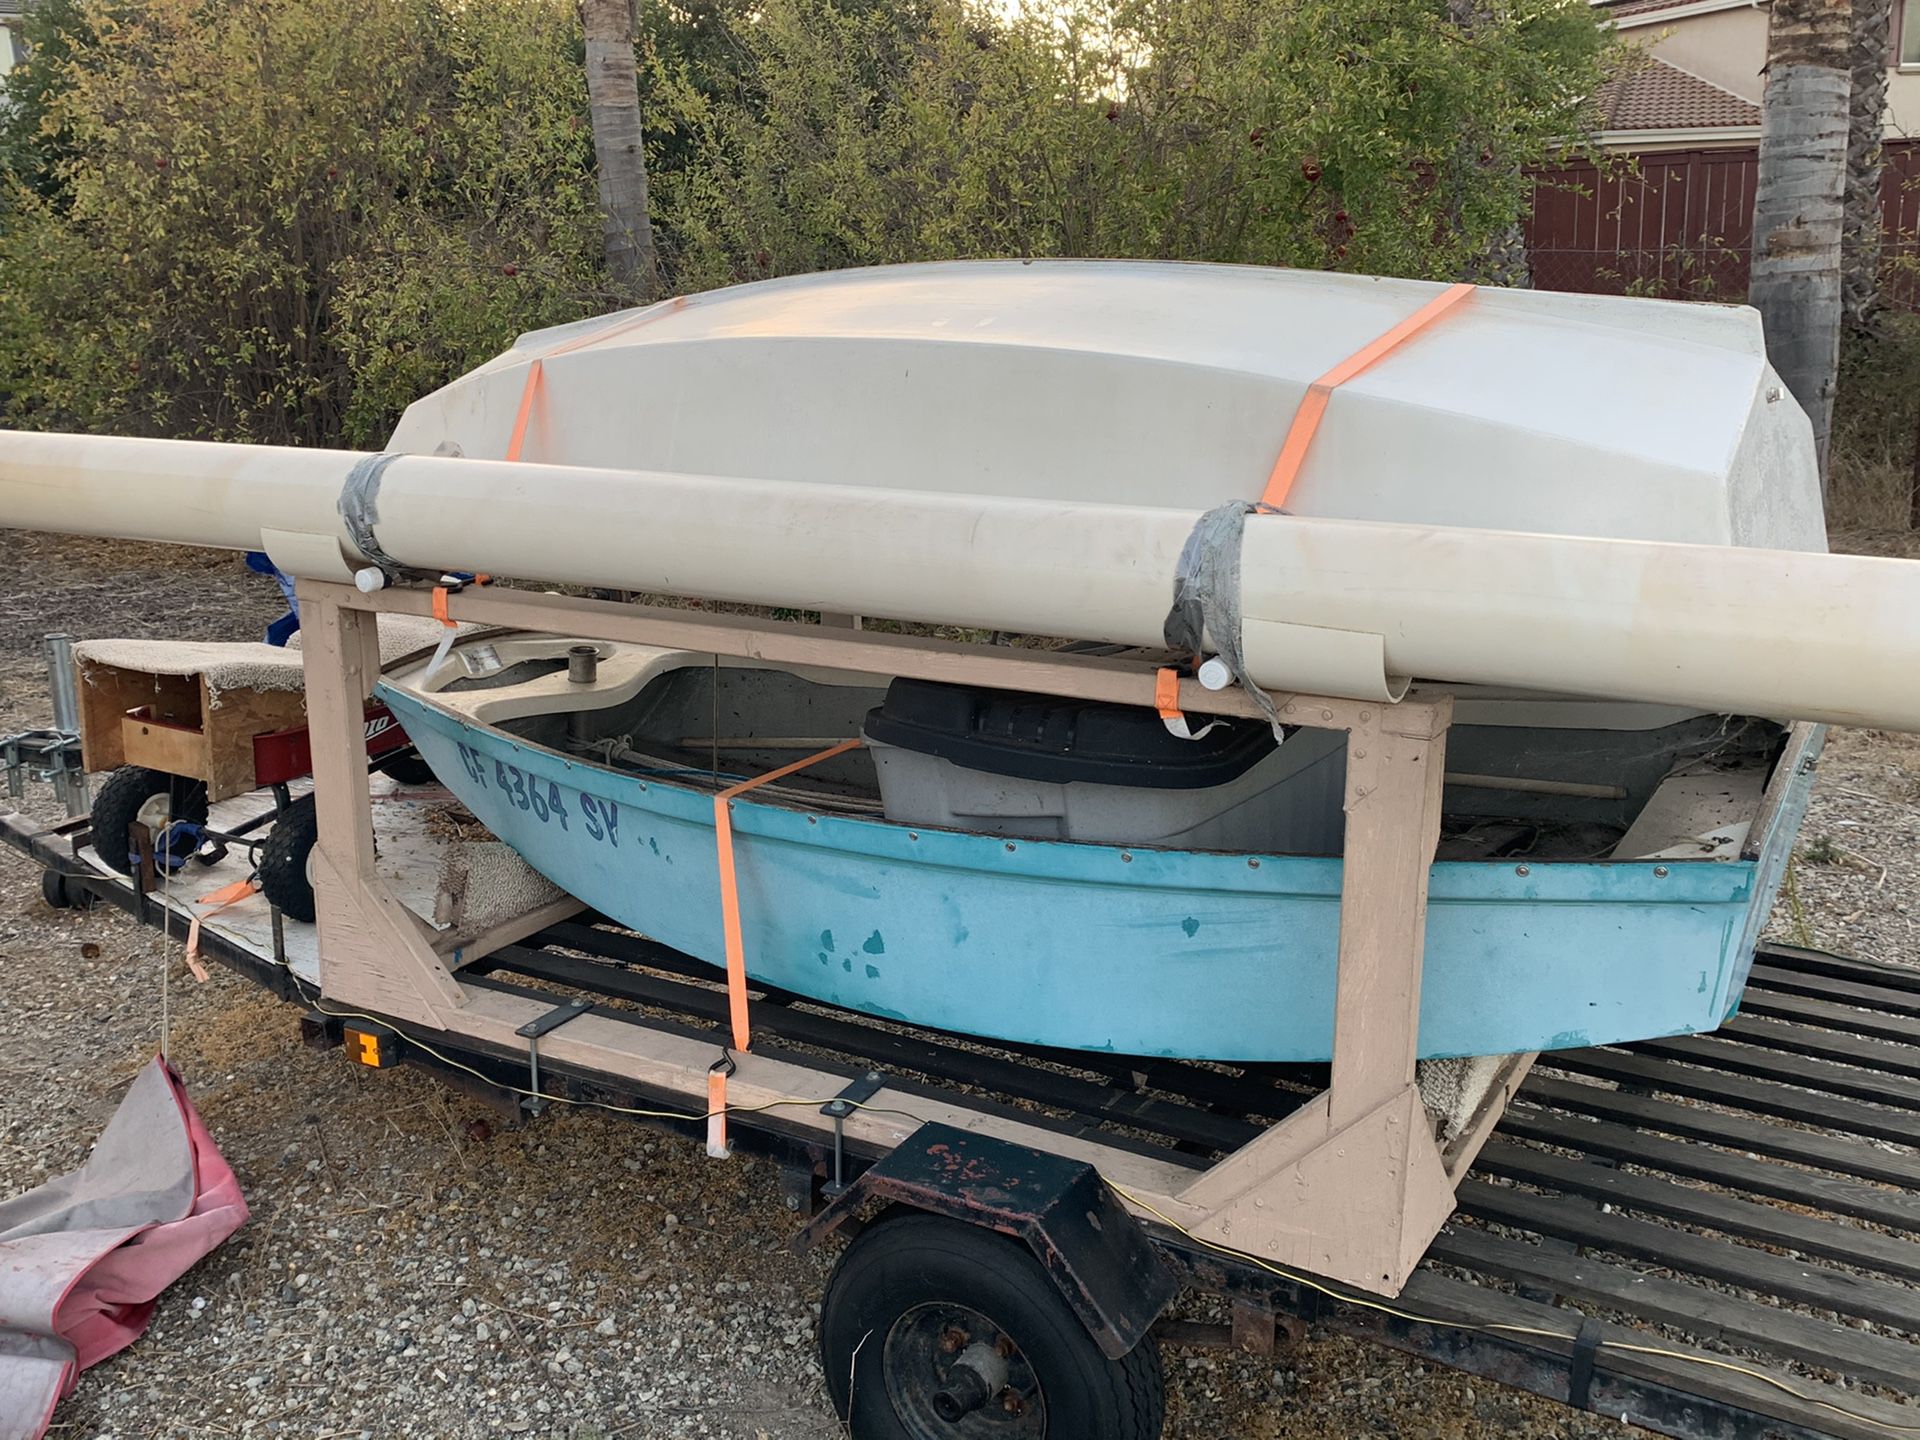 Double sabot trailer and boats